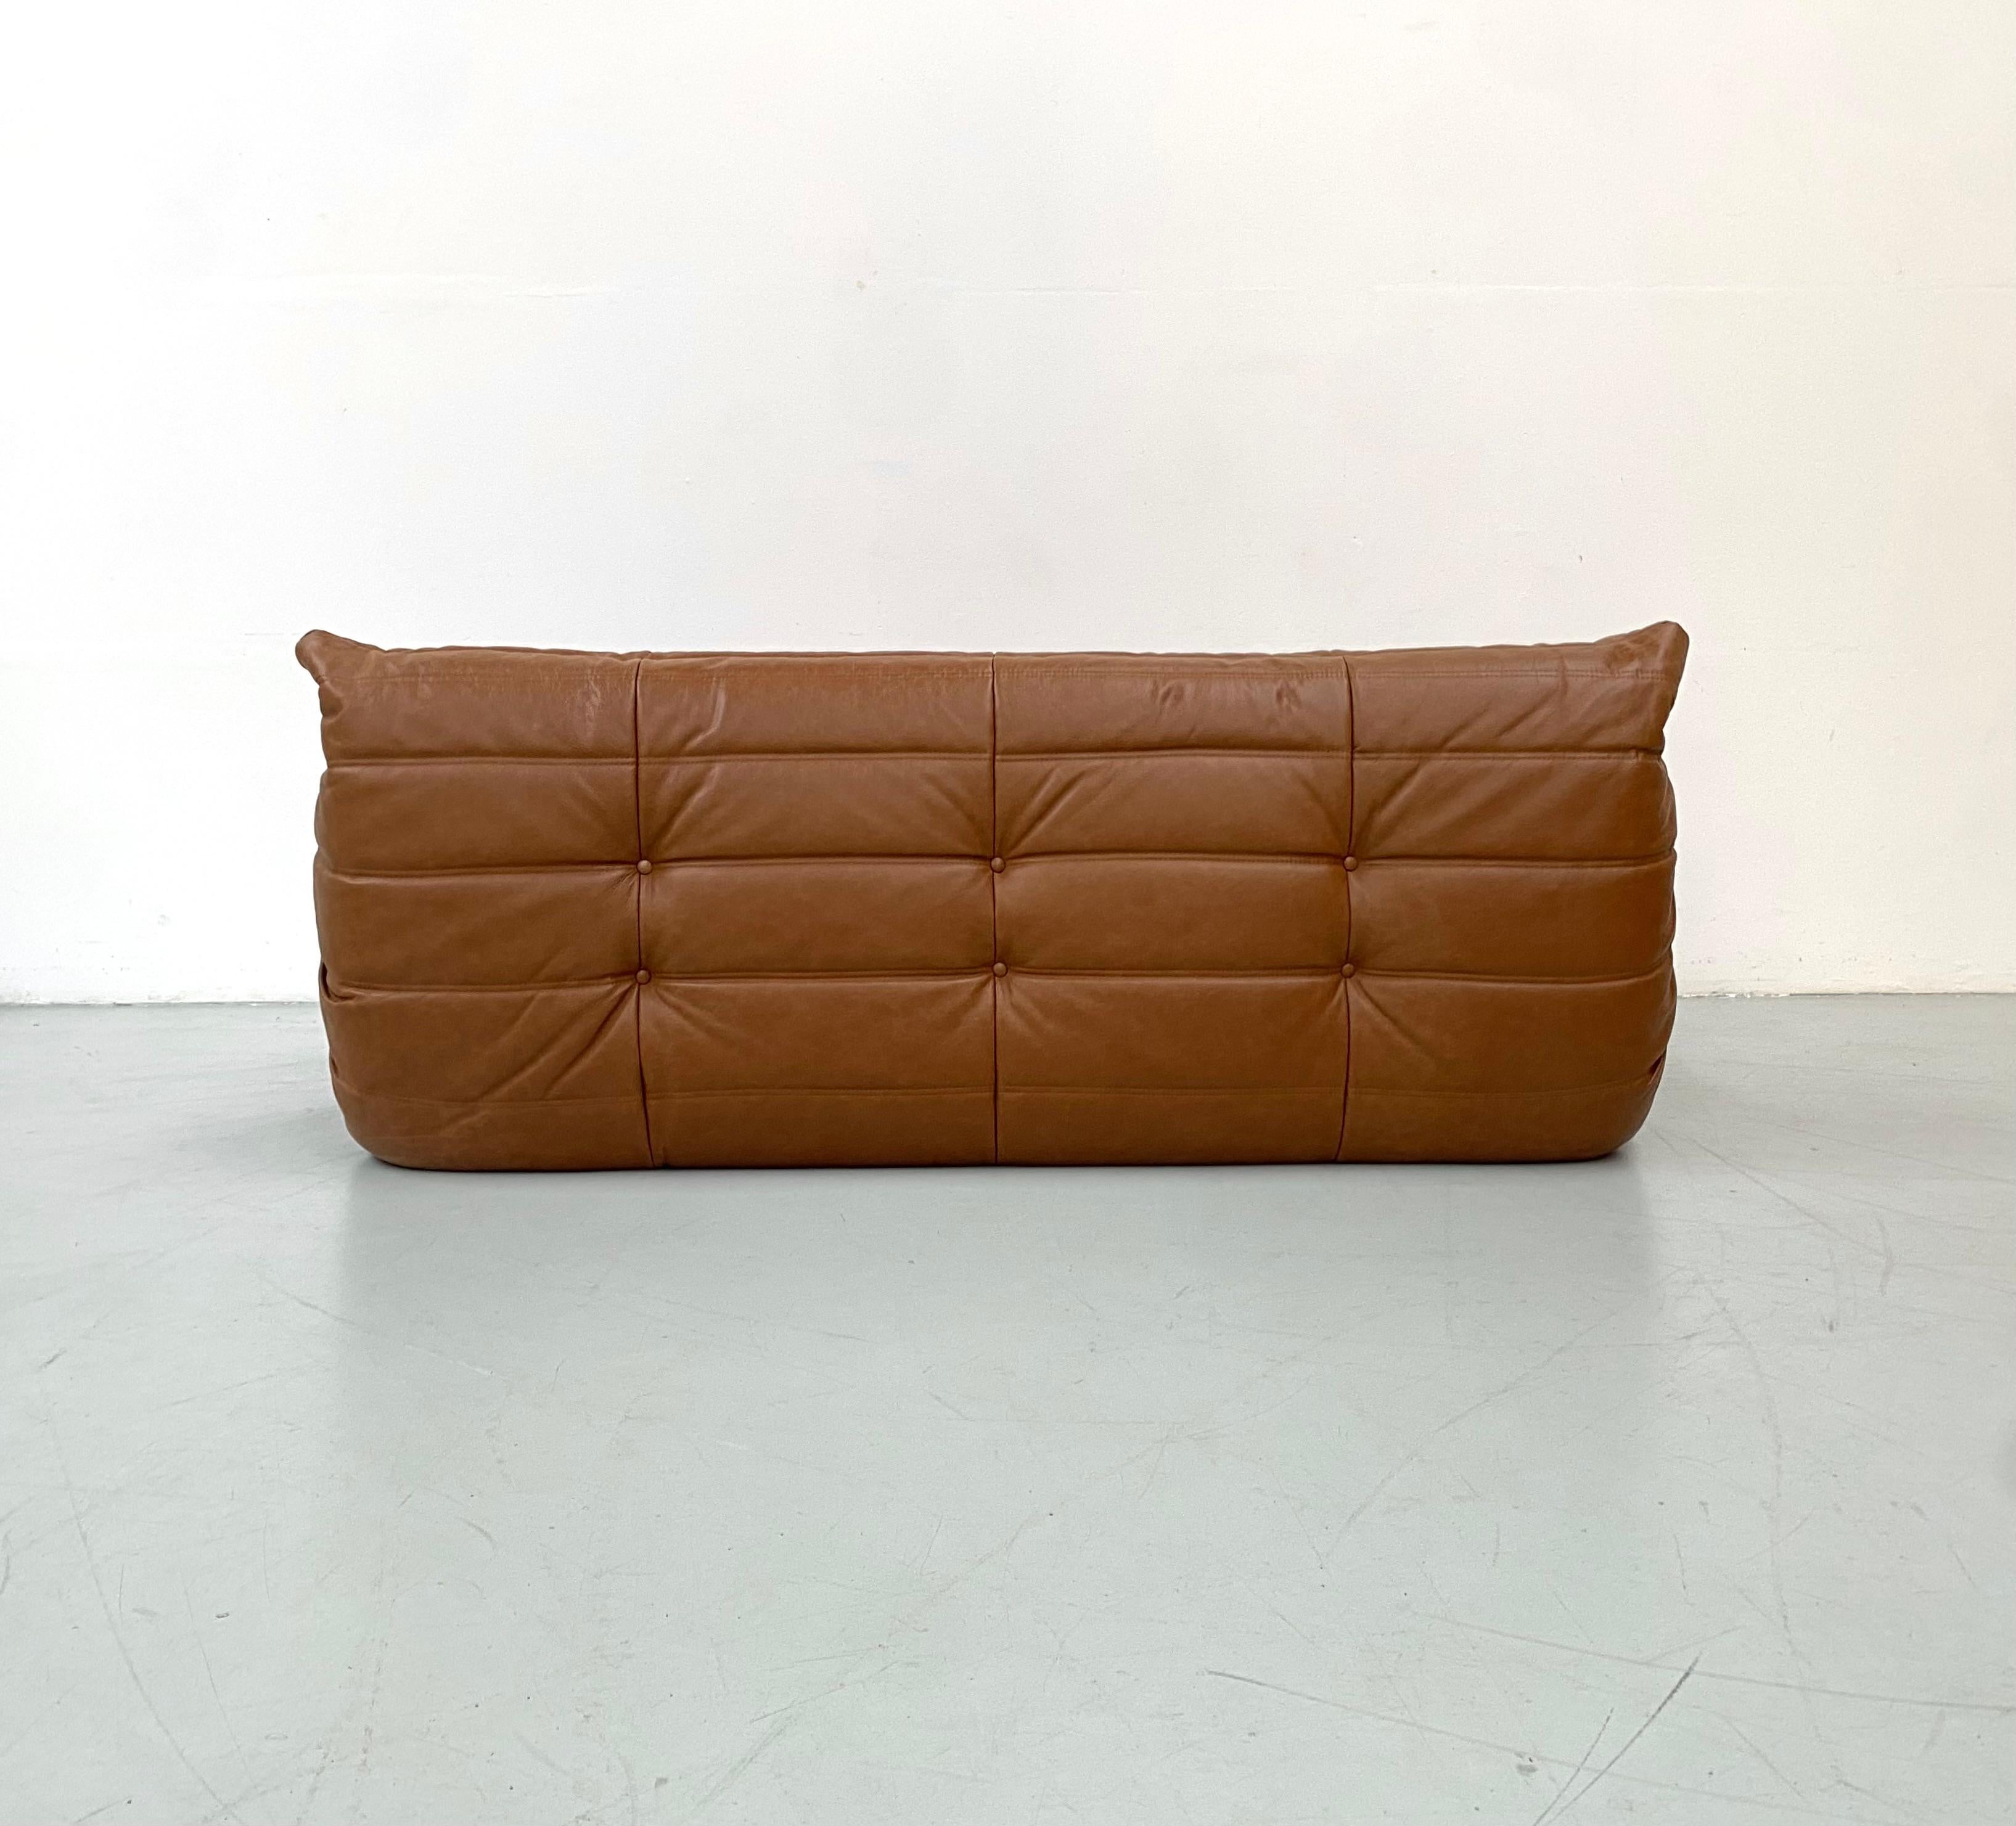 French Vintage Togo Sofa in Mid Brown Leather by Michel Ducaroy for Ligne Roset. For Sale 1